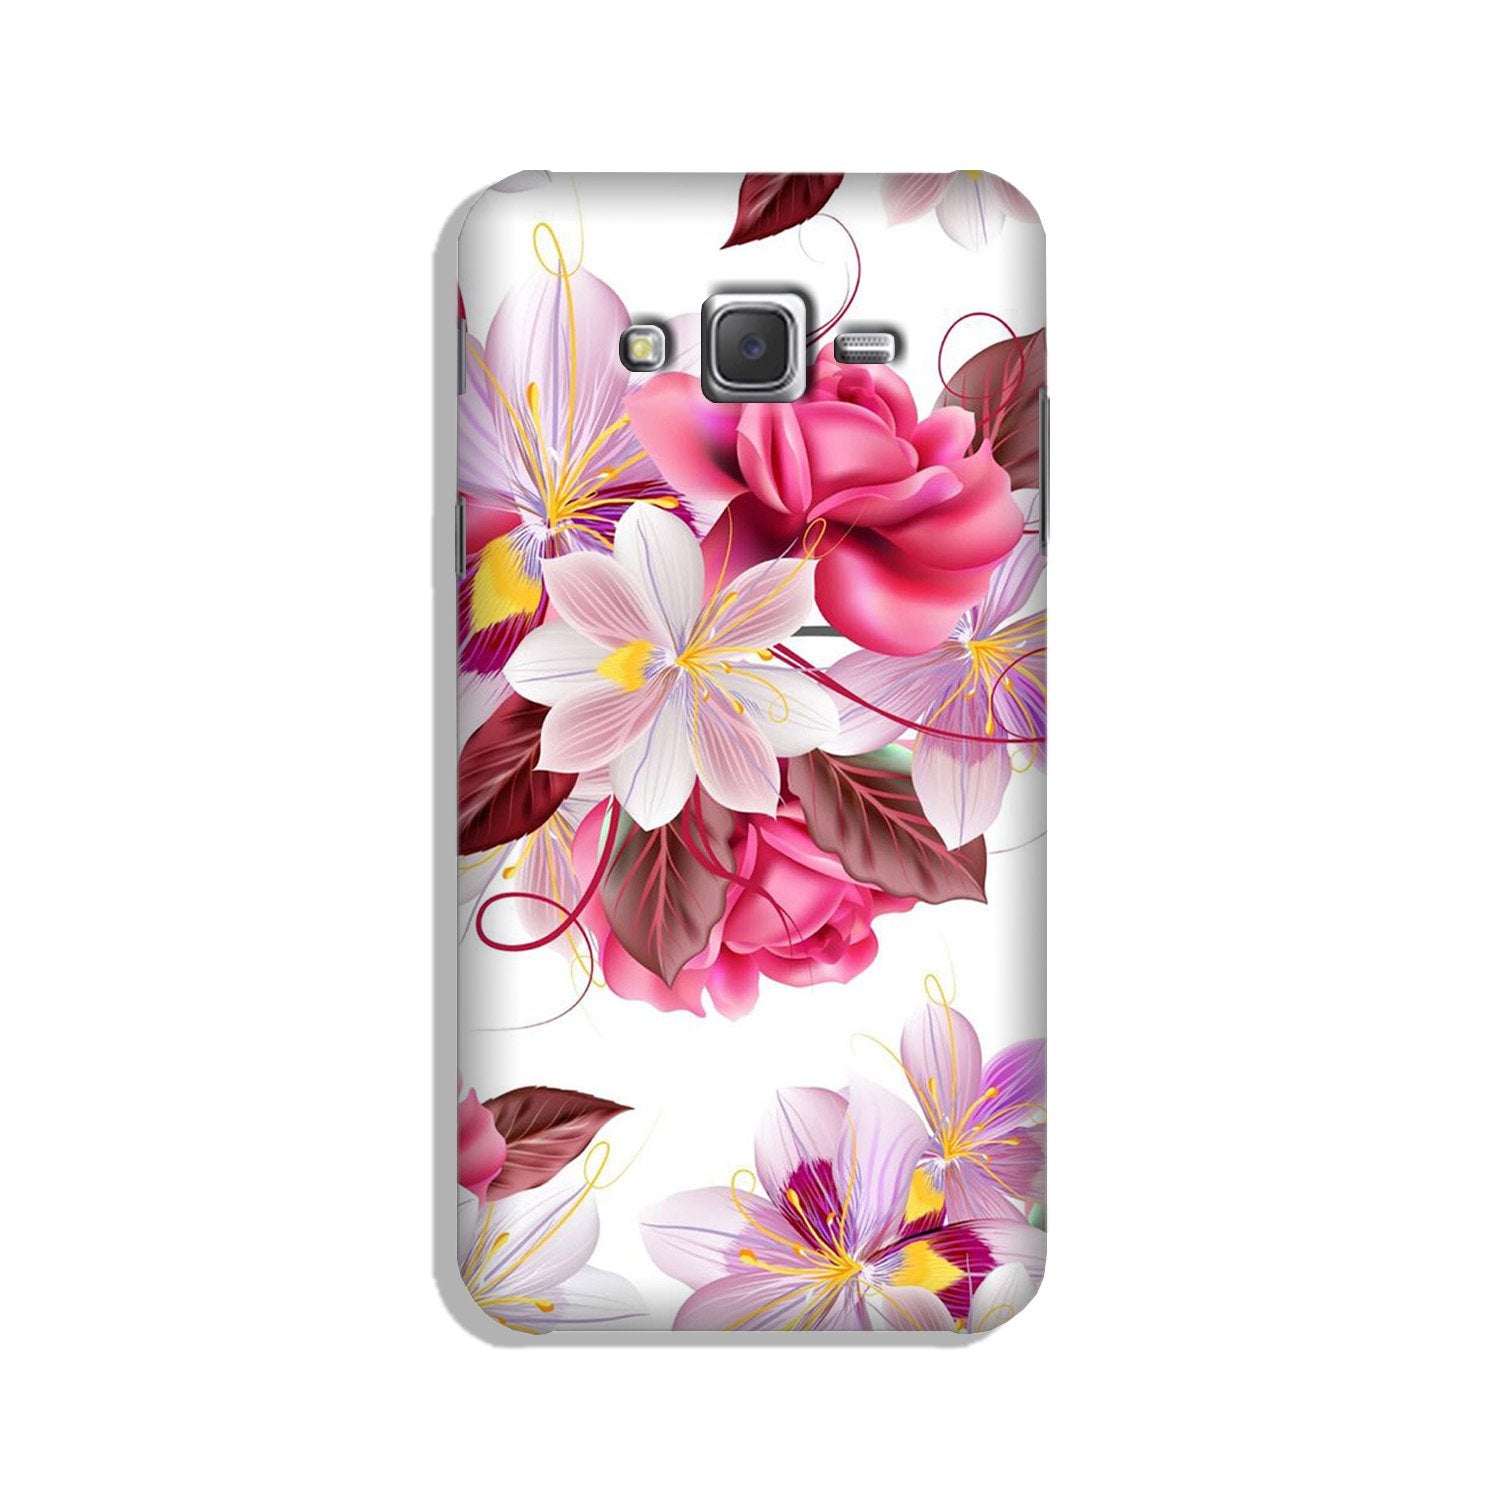 Beautiful flowers Case for Galaxy J3 (2015)